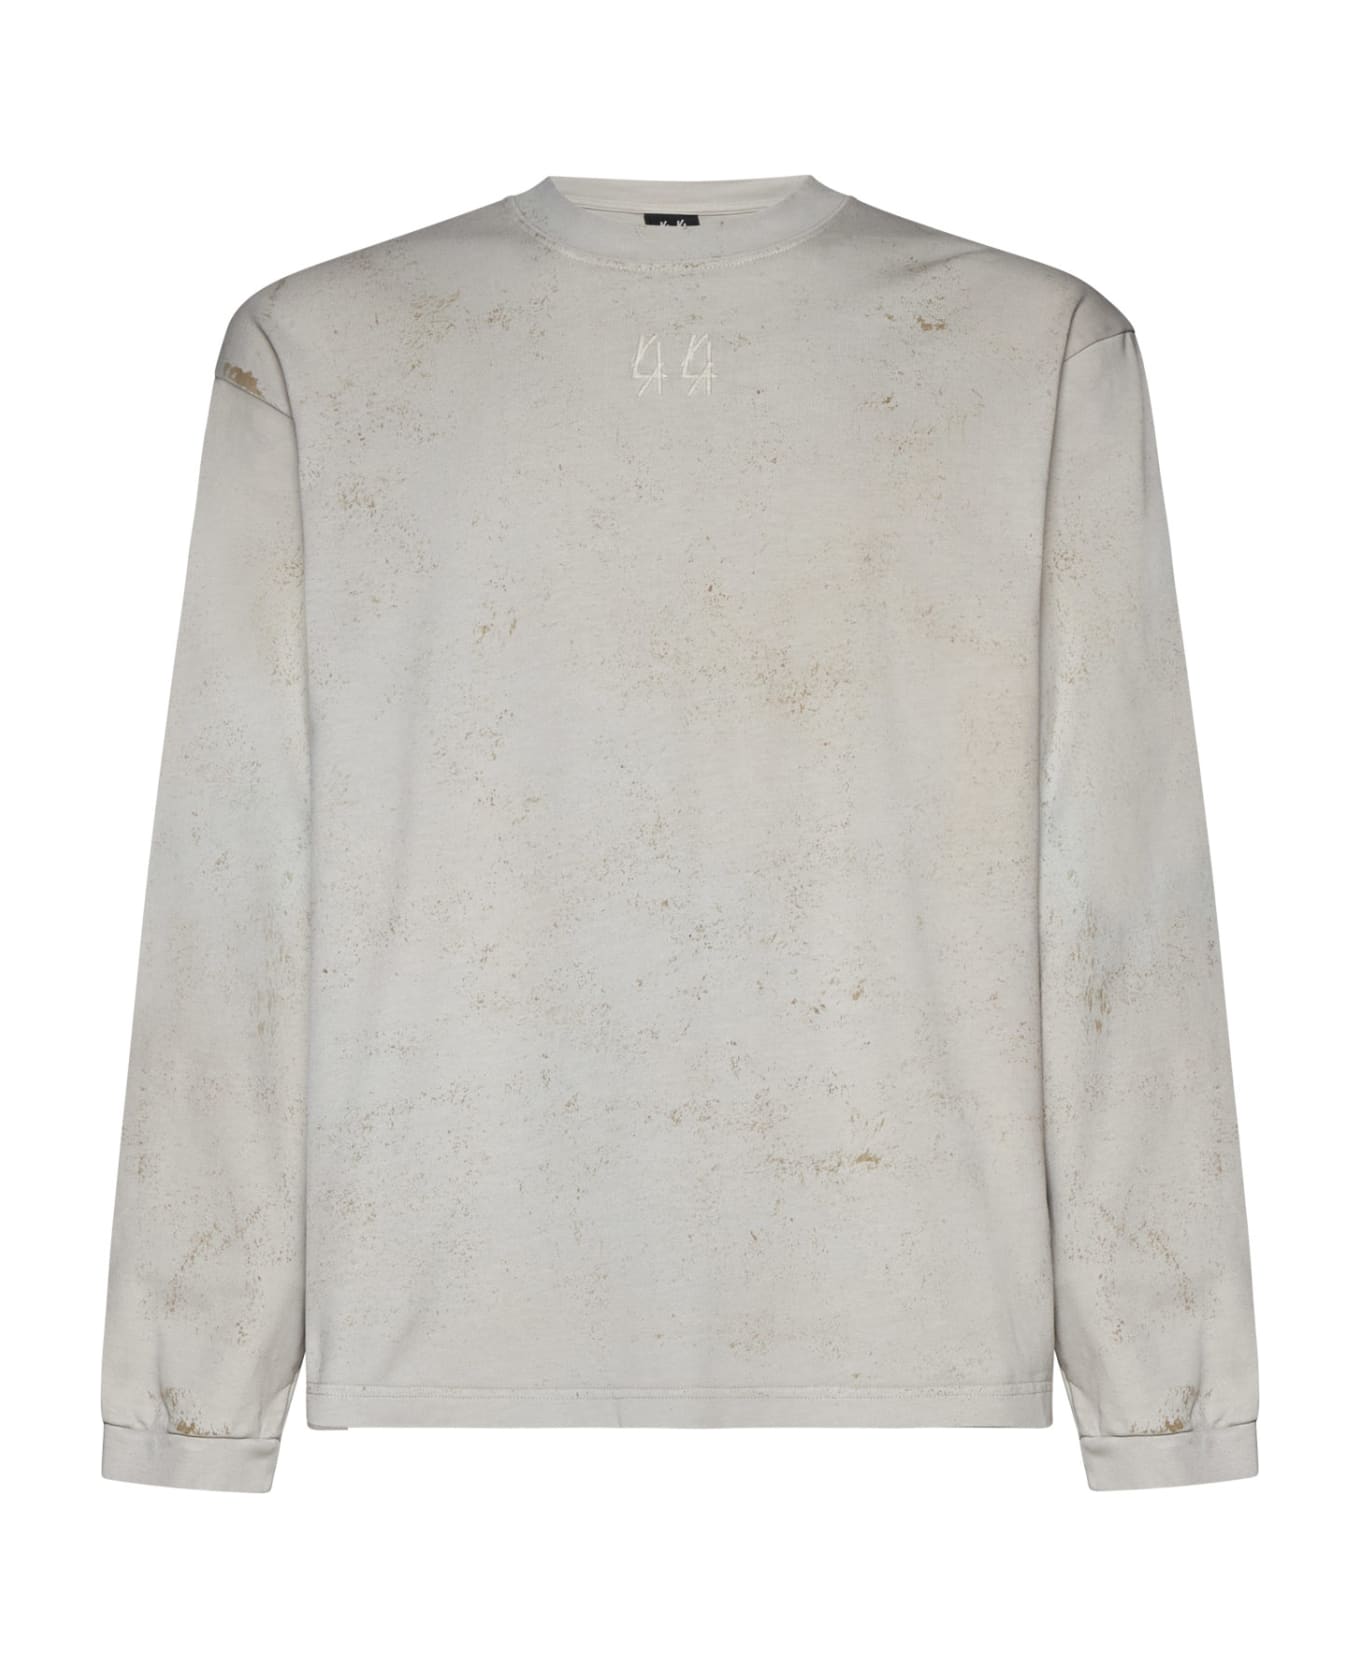 44 Label Group Sweater - Dirty white+gyps